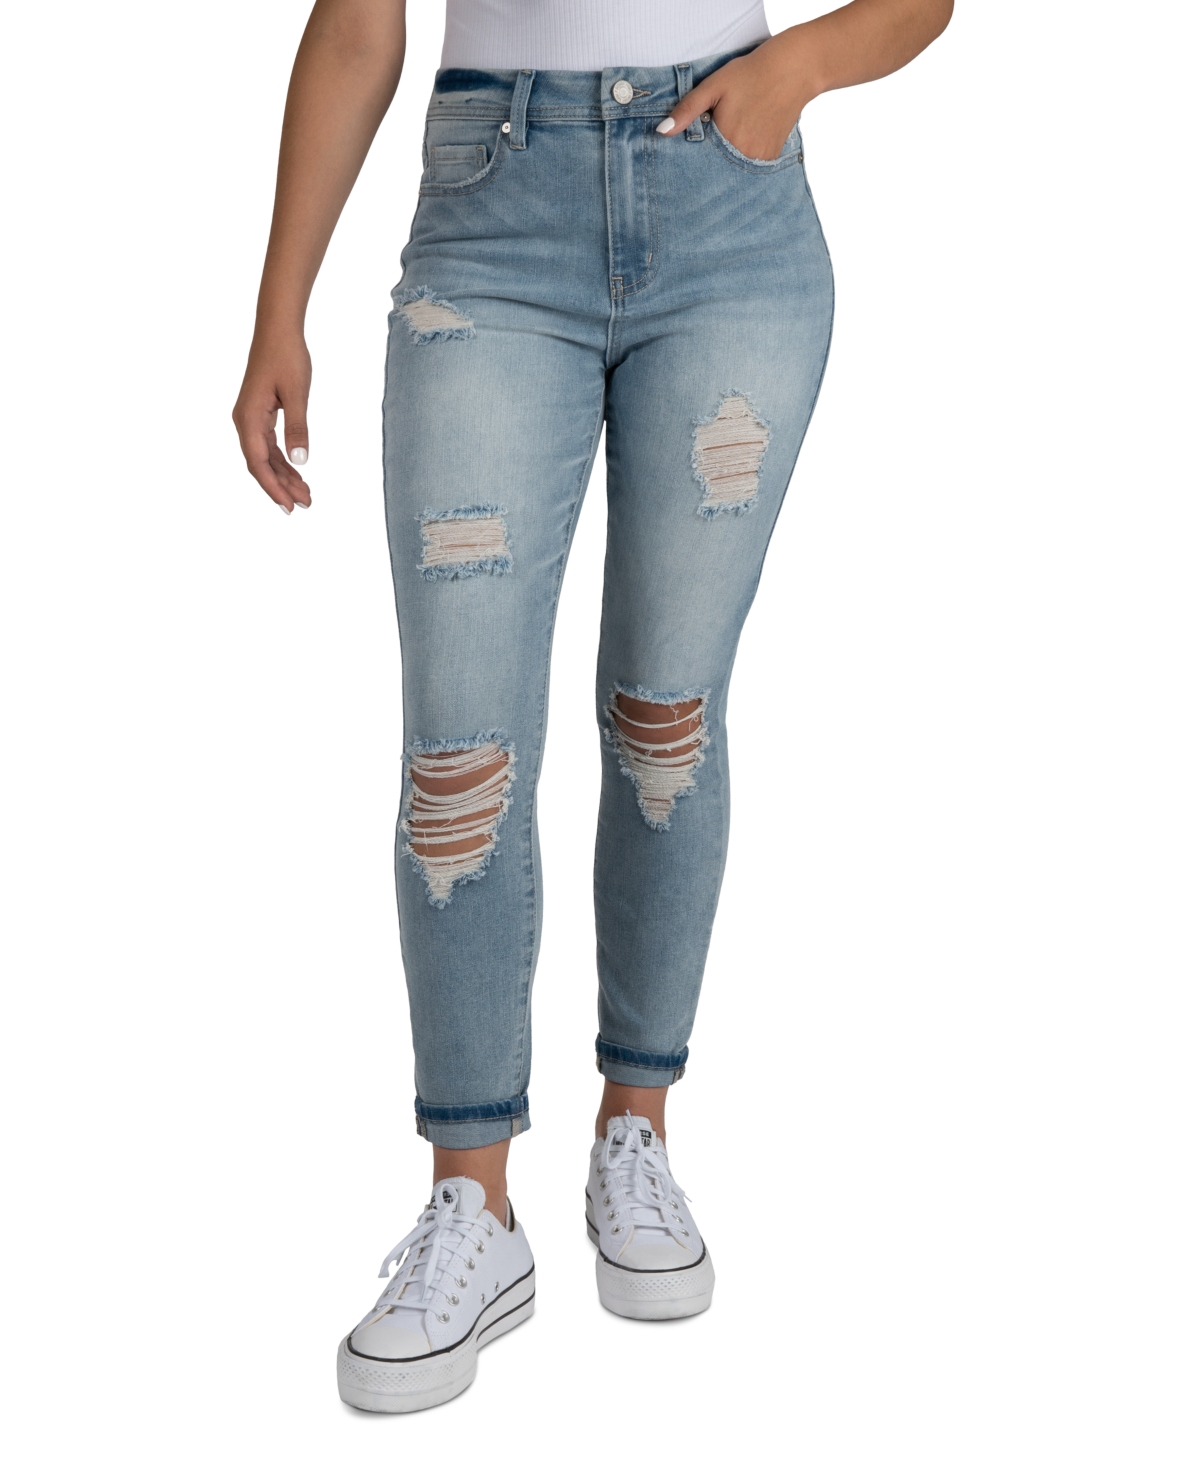 Juniors' High-Rise Ripped Skinny Jeans - Light Blue